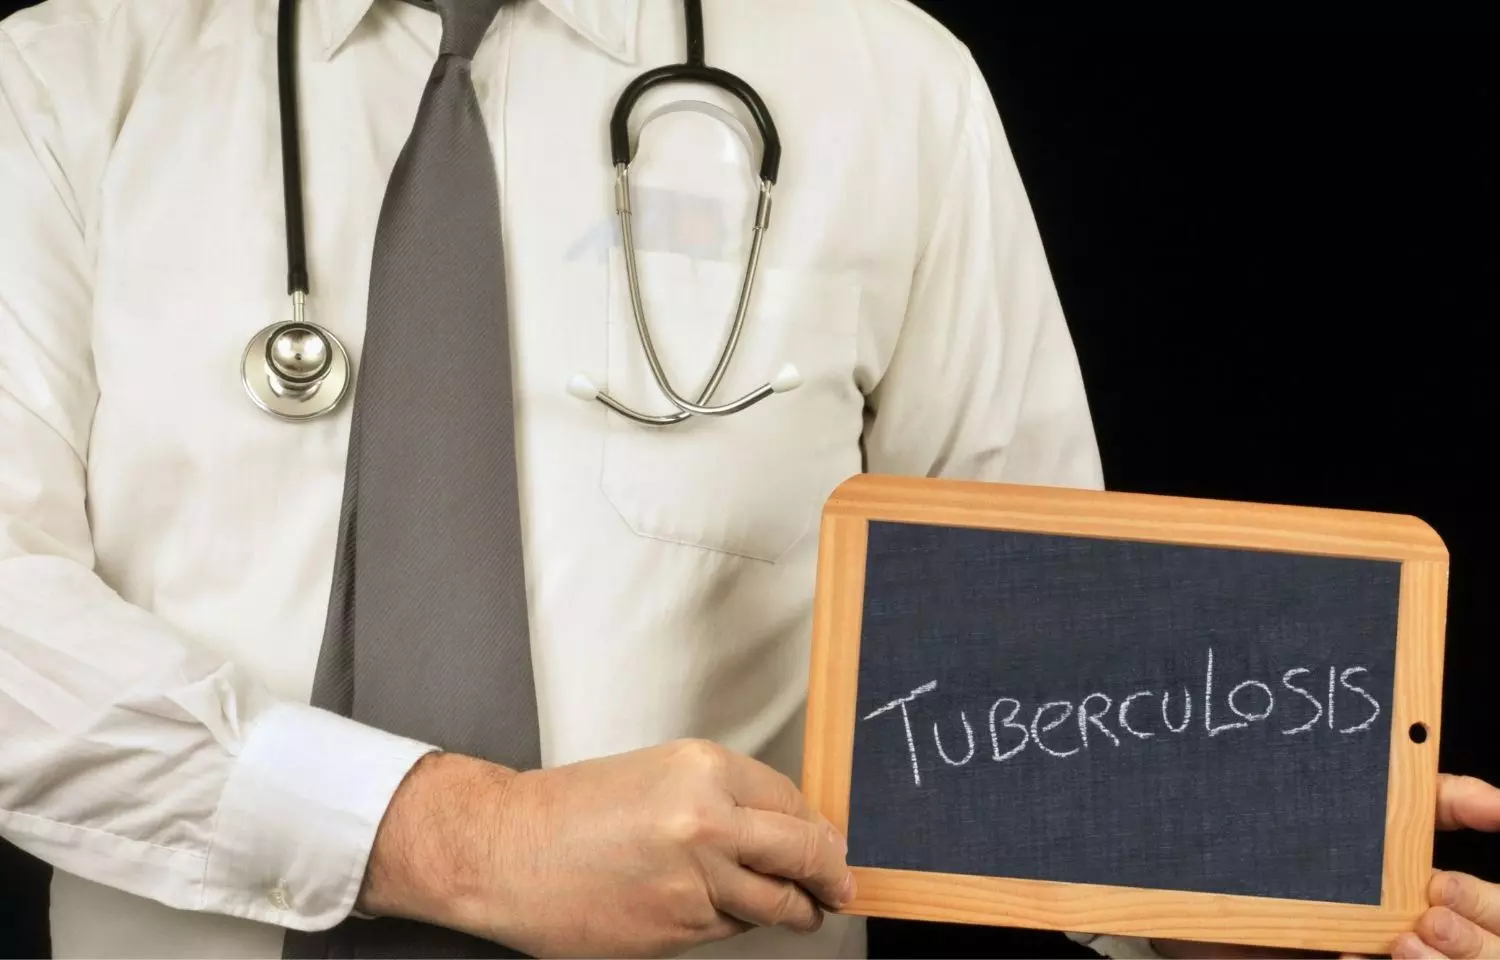 ICMR study to evaluate efficacy of shorter 4-month tuberculosis treatment regimen